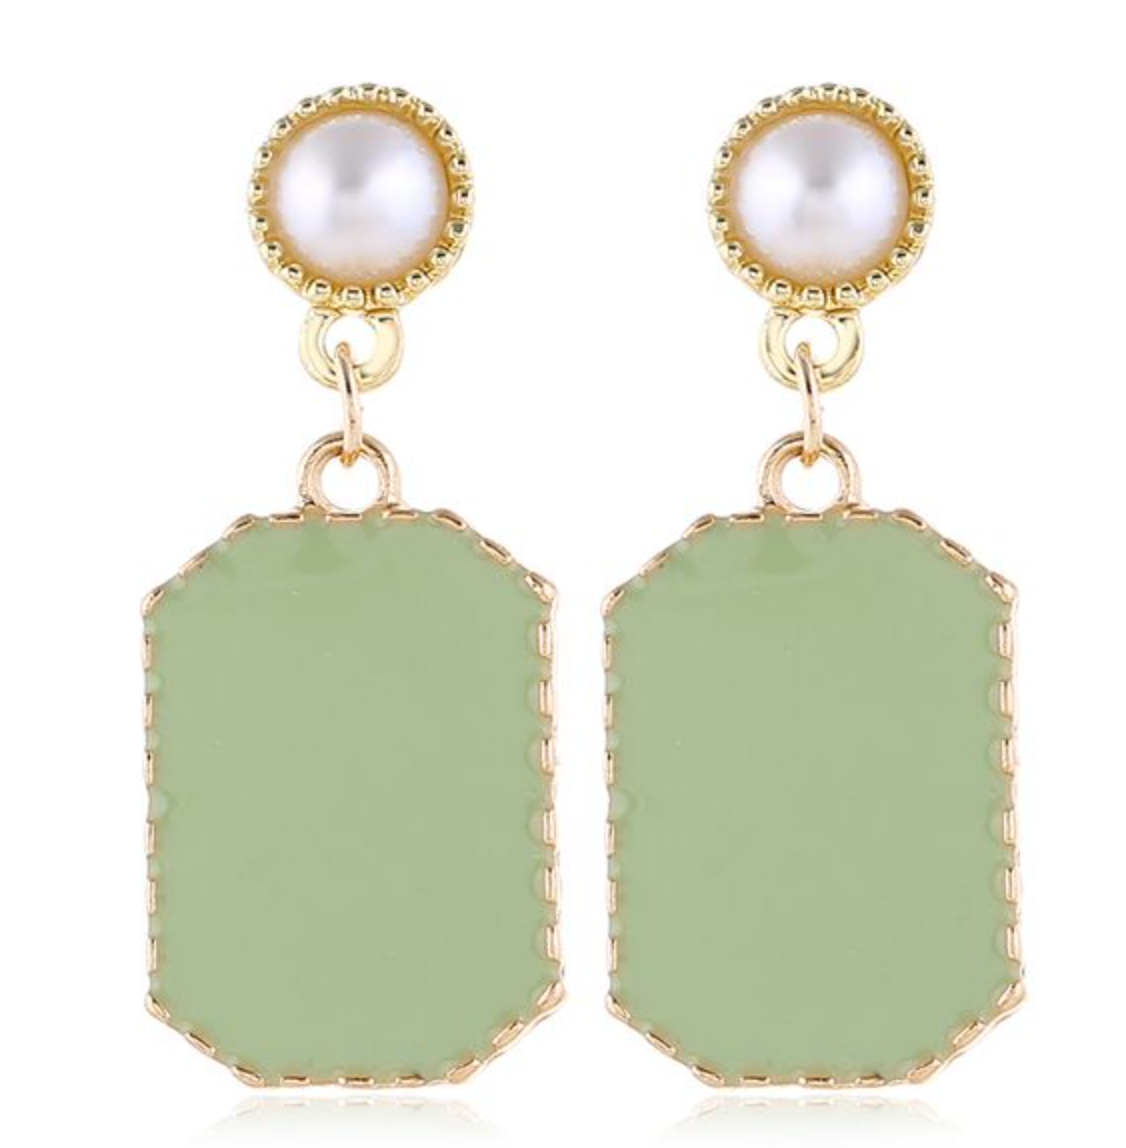 Pastel Passion Earring - Mint